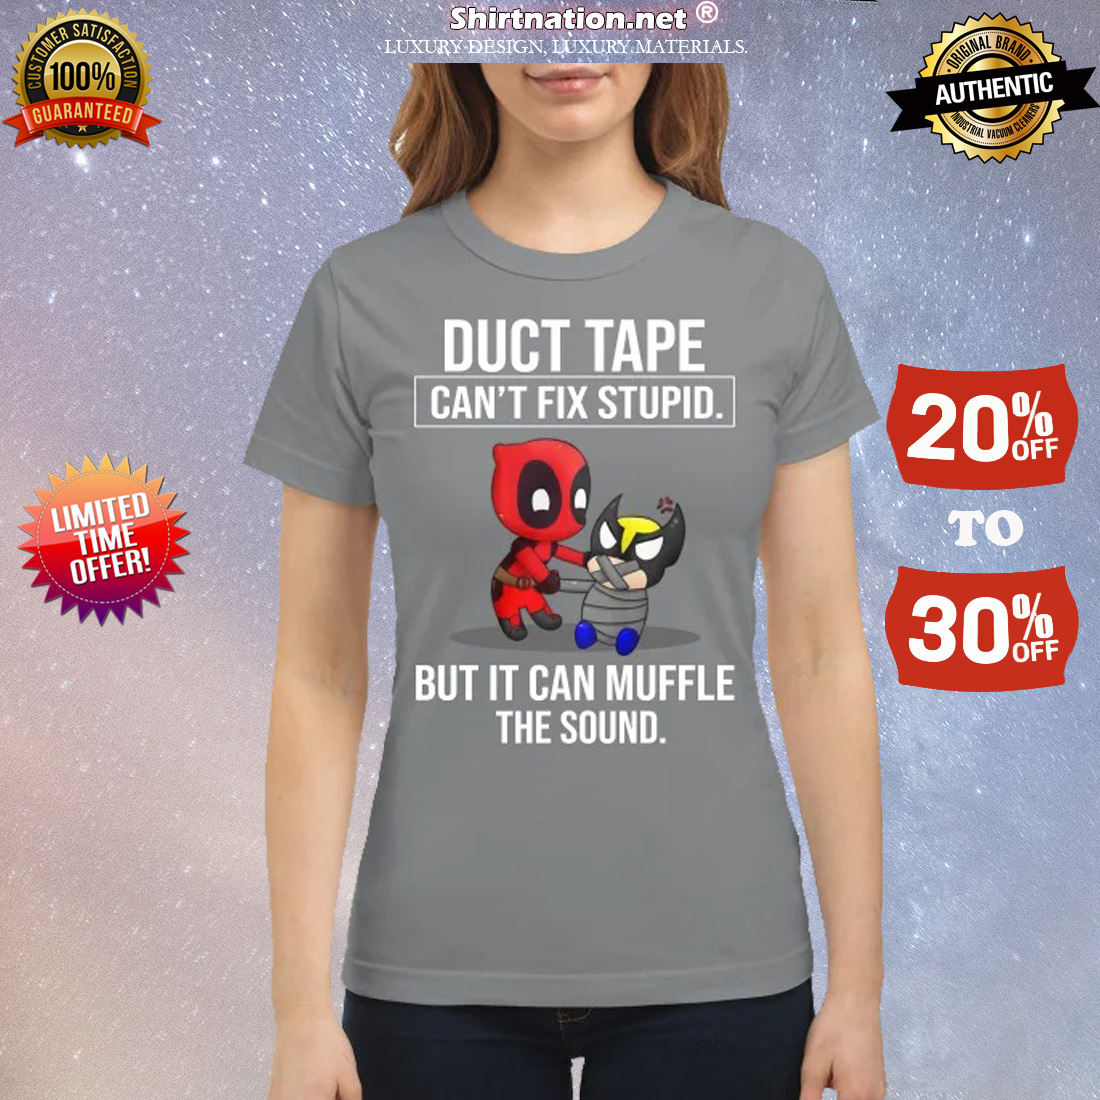 Duct tape can't fix stupid but it can muffle the sound classic shirt